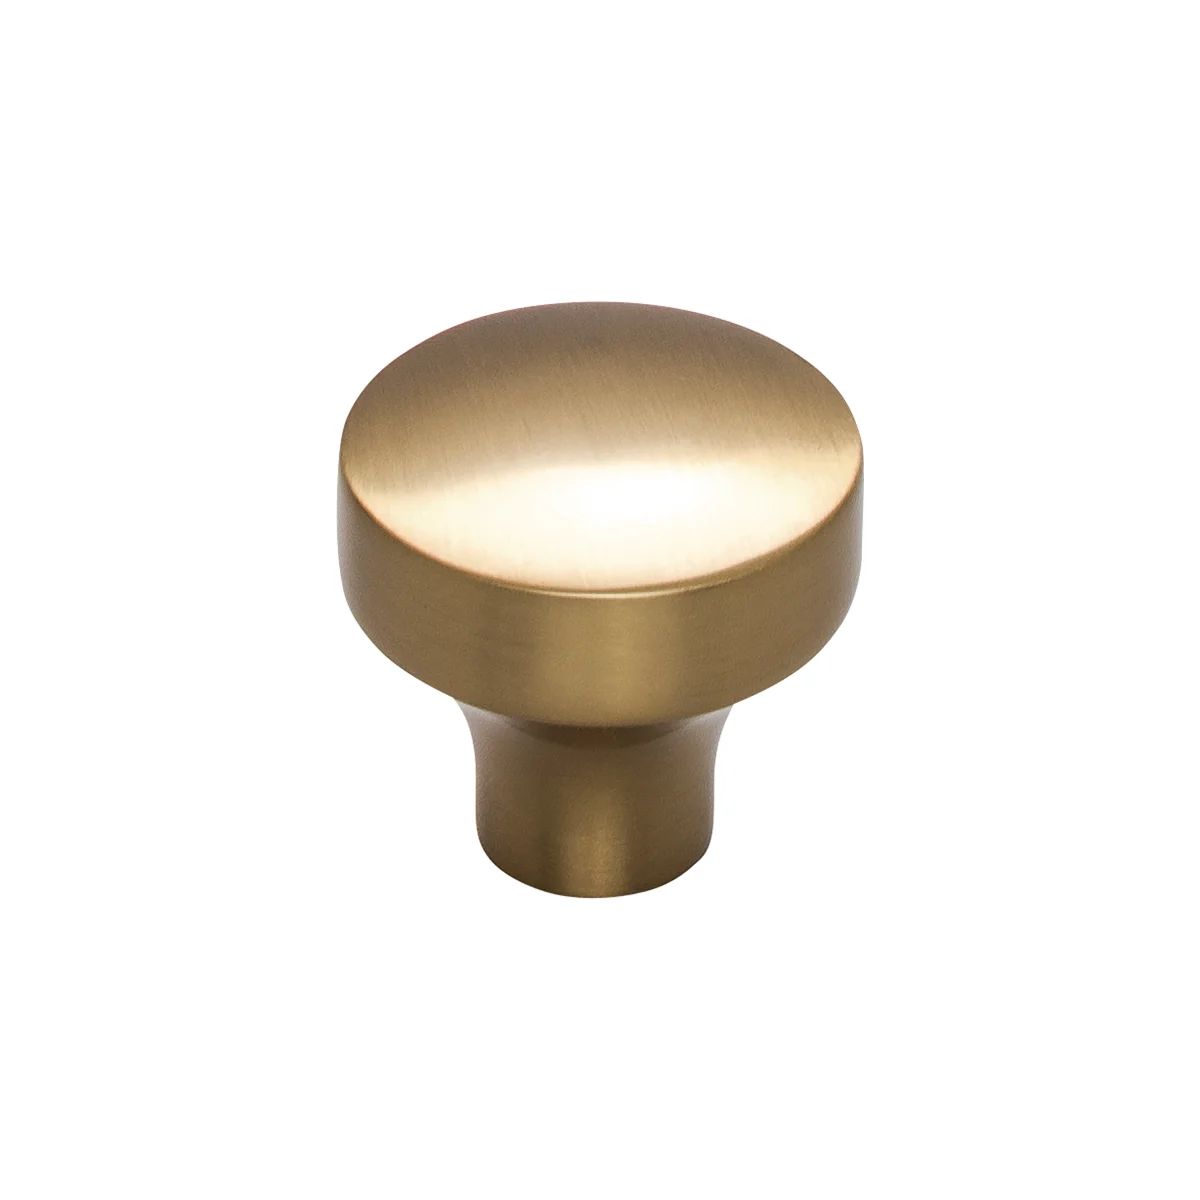 Kinney 1-1/4 Inch Mushroom Cabinet Knob from the Lynwood Collection | Build.com, Inc.